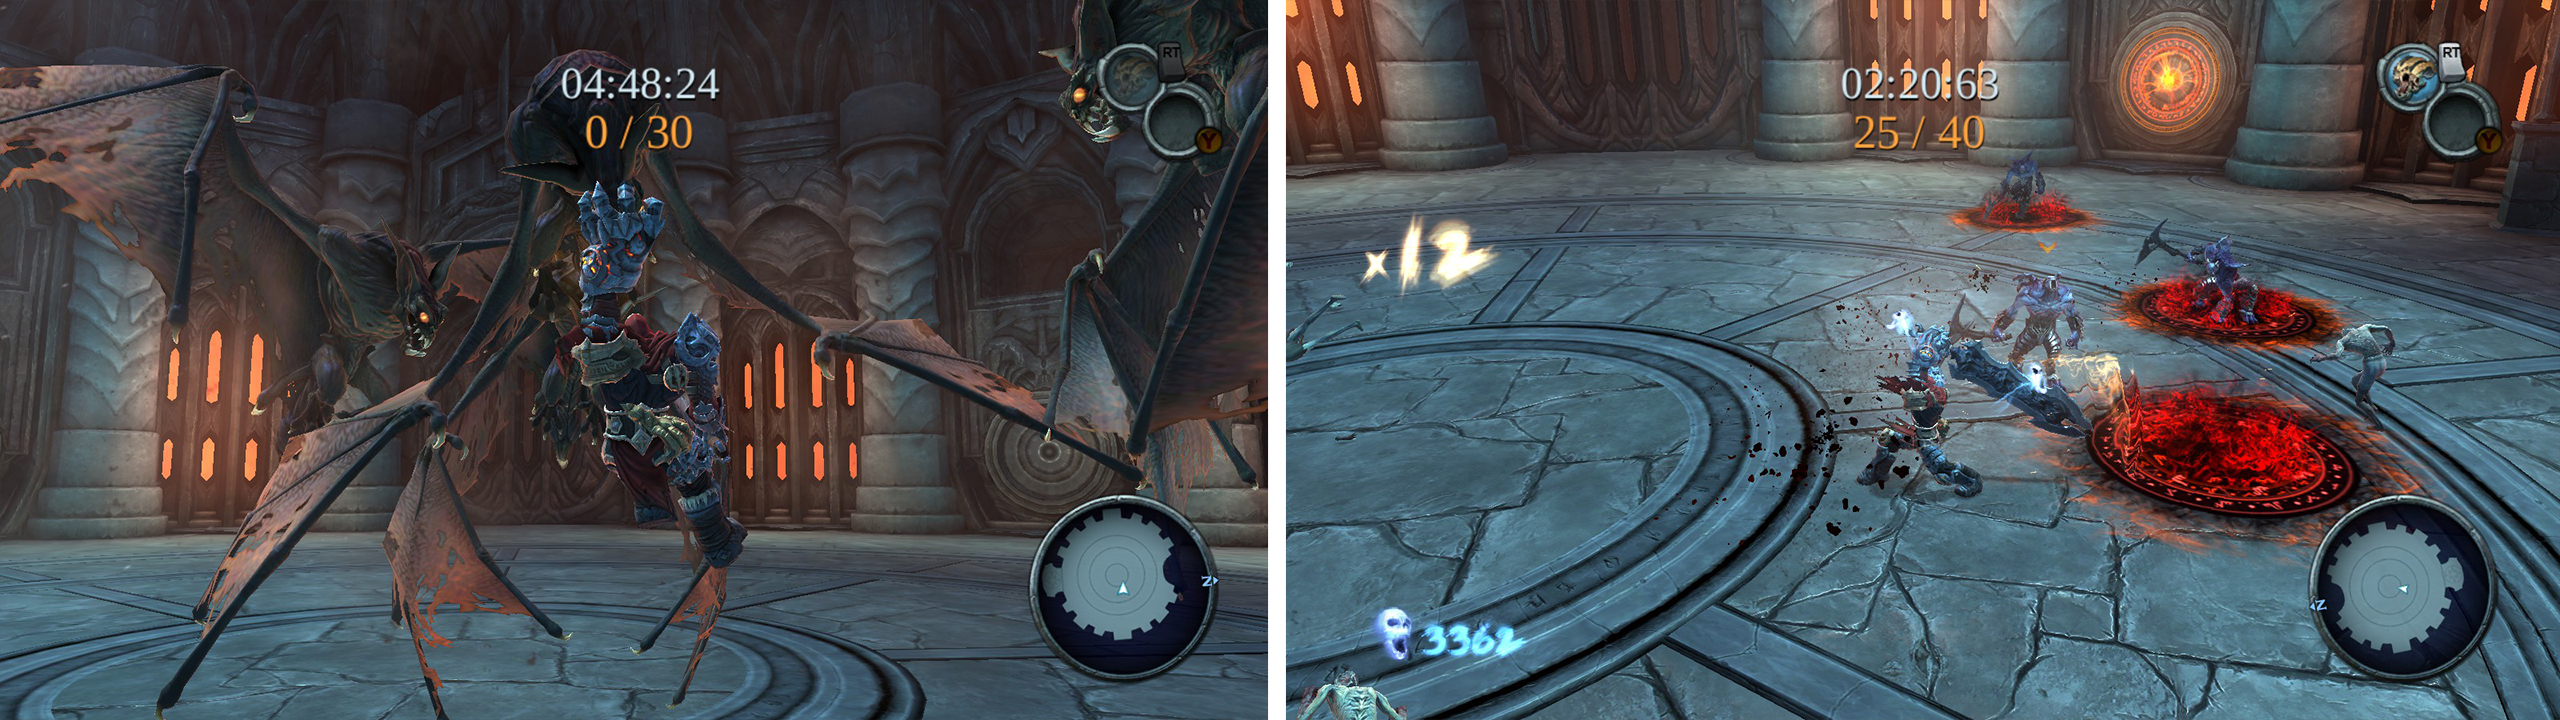 If you can chain together 5 duskwing finisher kills in Challenge 3 youll earn an achievement/trophy (left). Youll face an array of enemies during Challenge 4 (right).